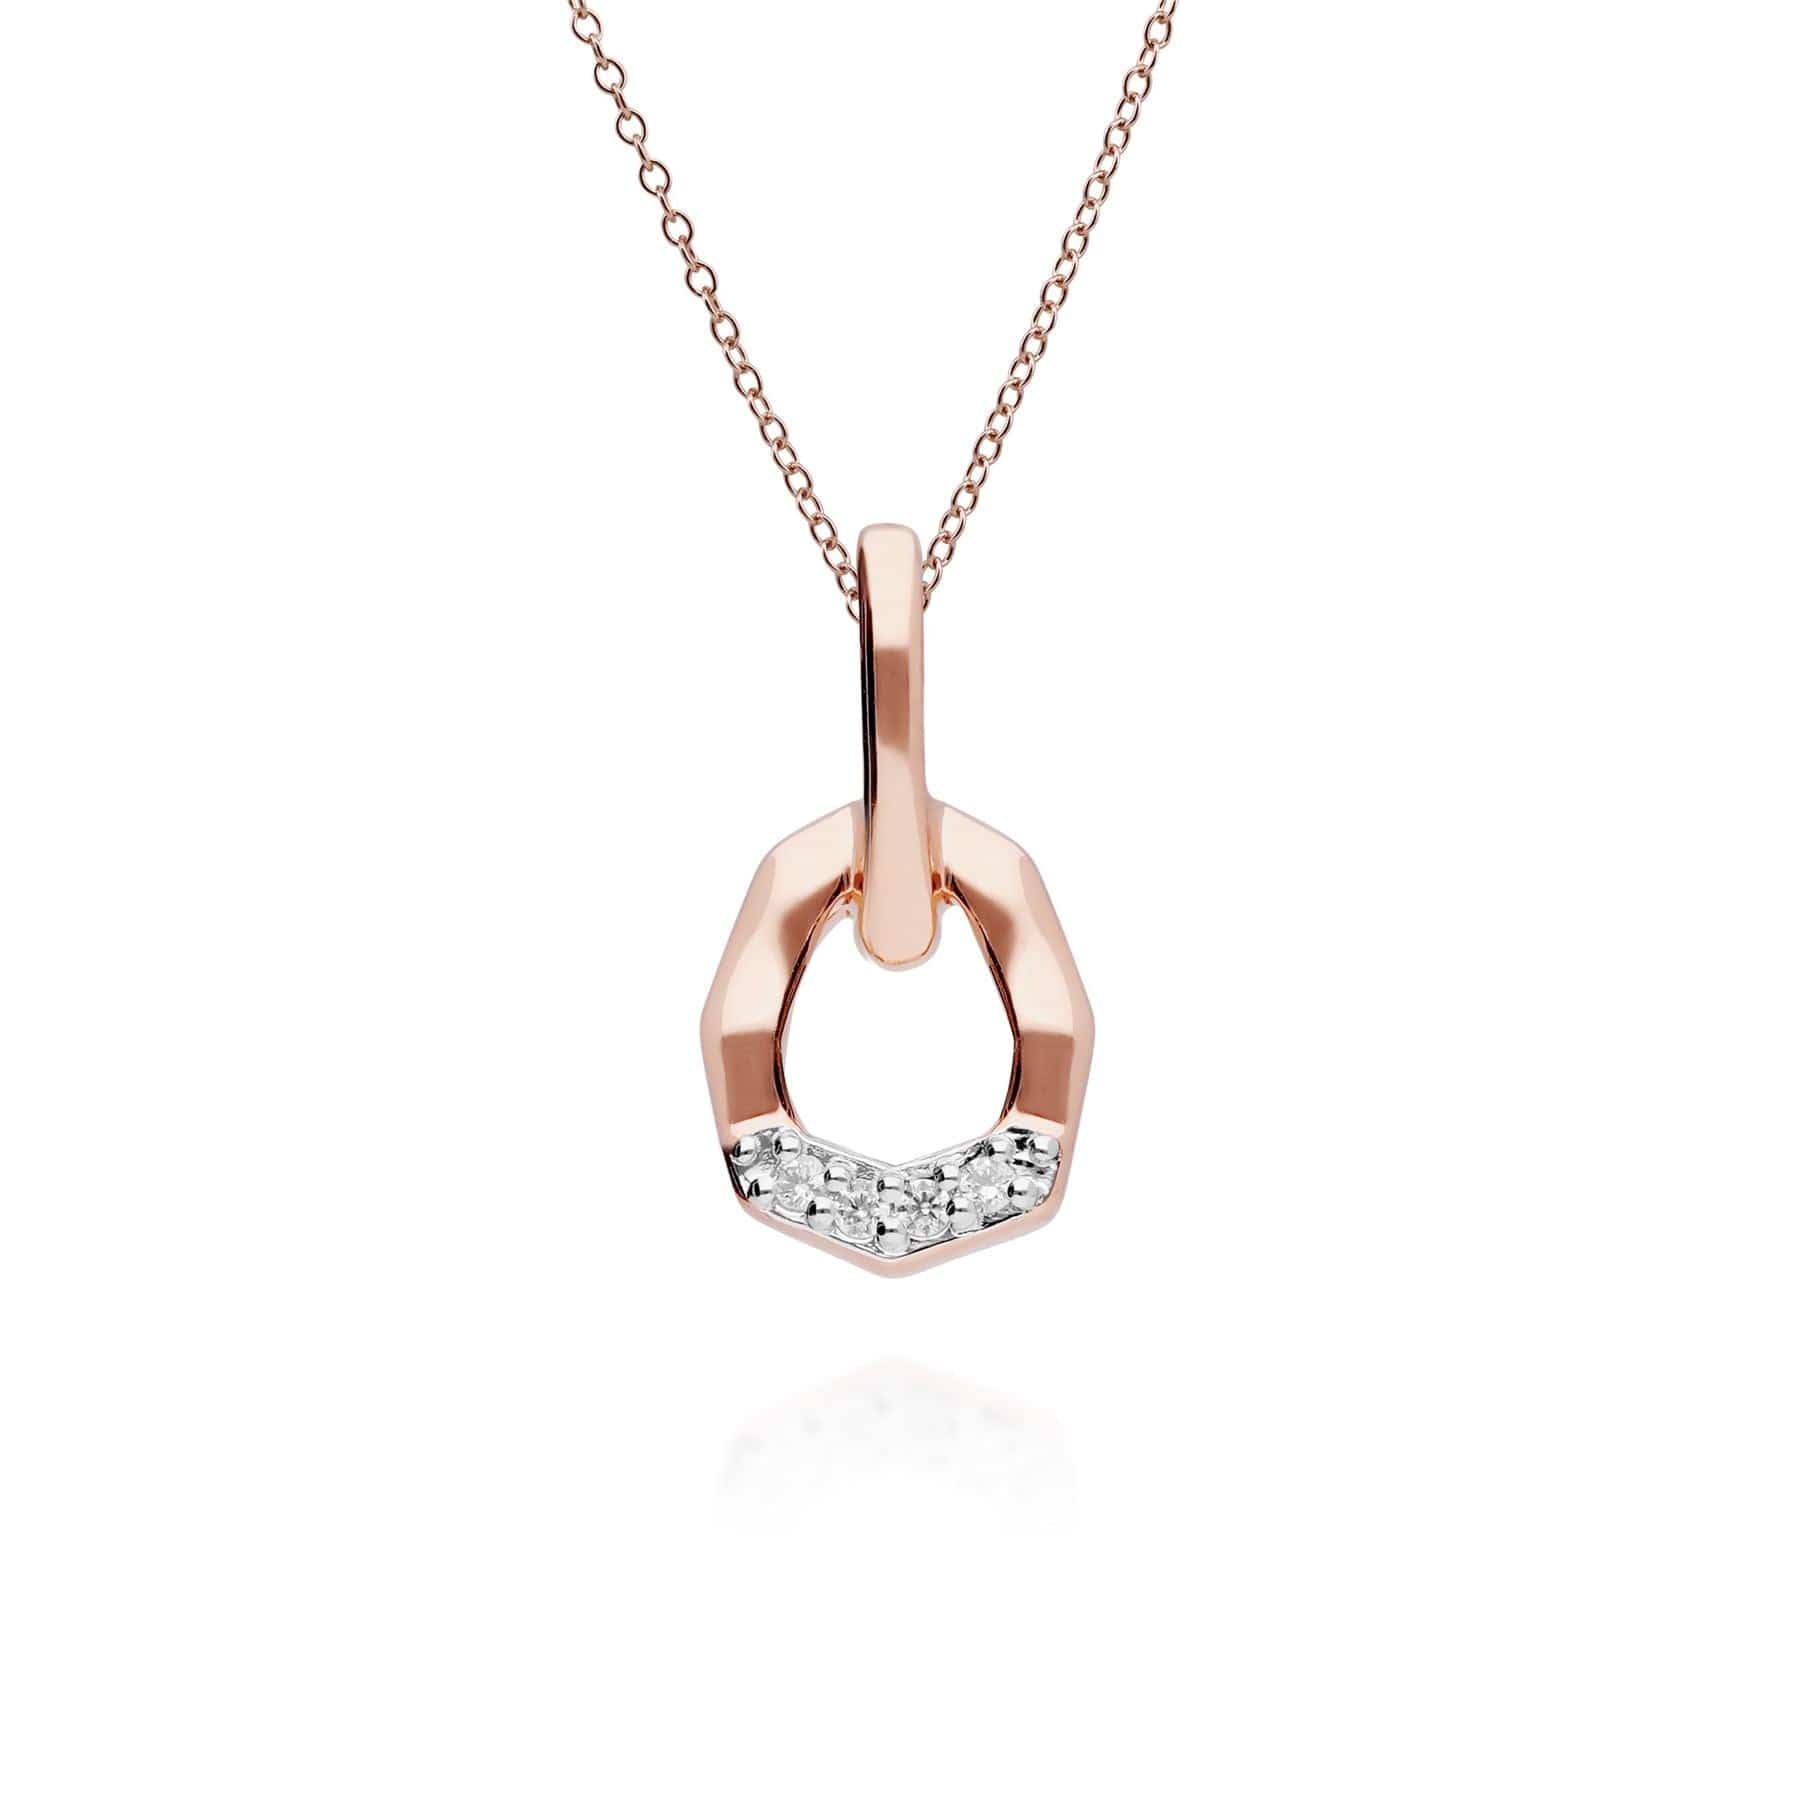 Diamond Pave Asymmetrical Pendant Necklace in 9ct Rose Gold